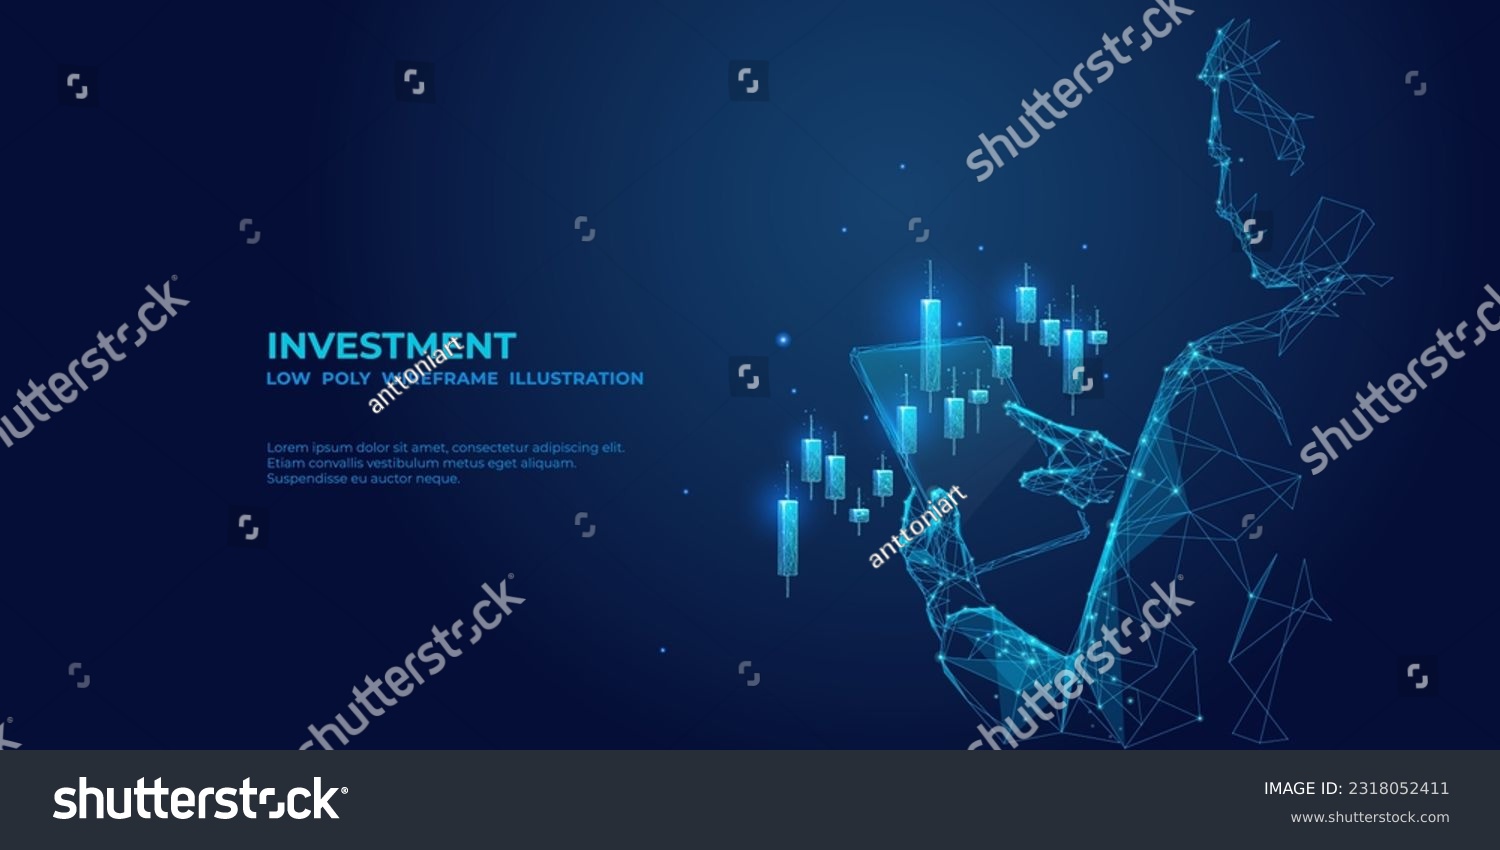 SVG of Abstract businessman is holding tablet with stock market candlestick hologram. Digital Trading or Investment concept. Futuristic low poly investor in technological blue. Vector 3D illustration. svg